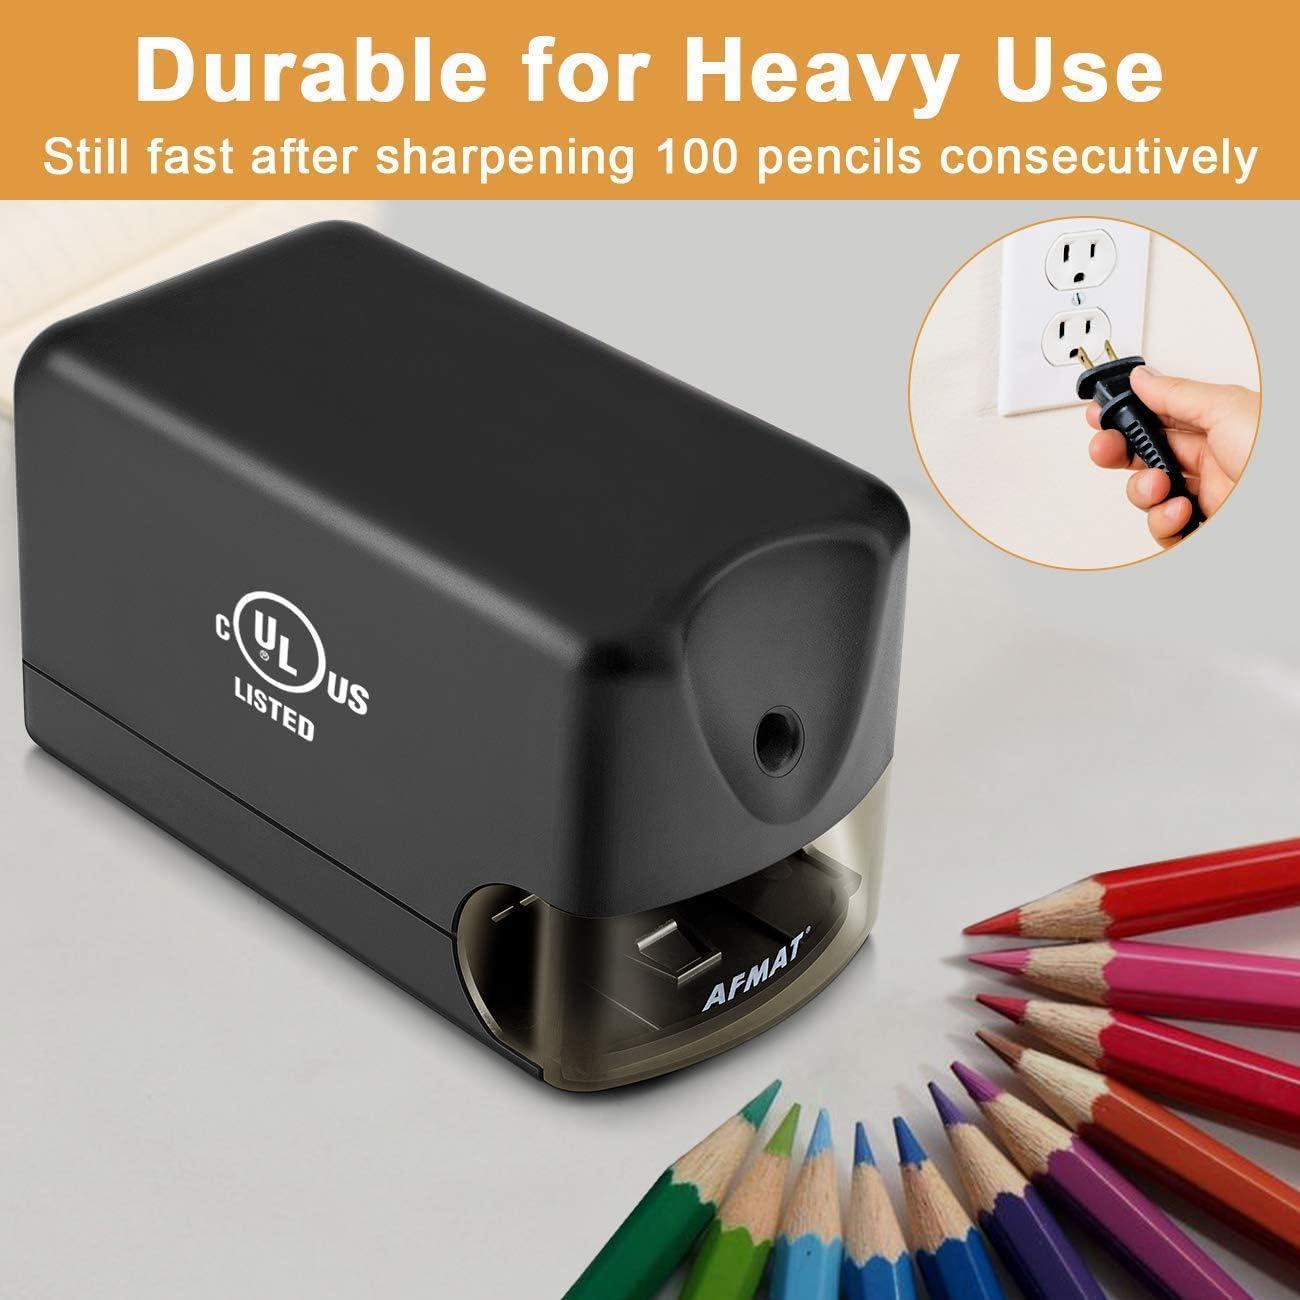 AFMAT Electric Pencil Sharpener, Heavy Duty Classroom Pencil Sharpeners for  6.5-8mm No.2/Colored Pencils, UL Listed Industrial Pencil Sharpener